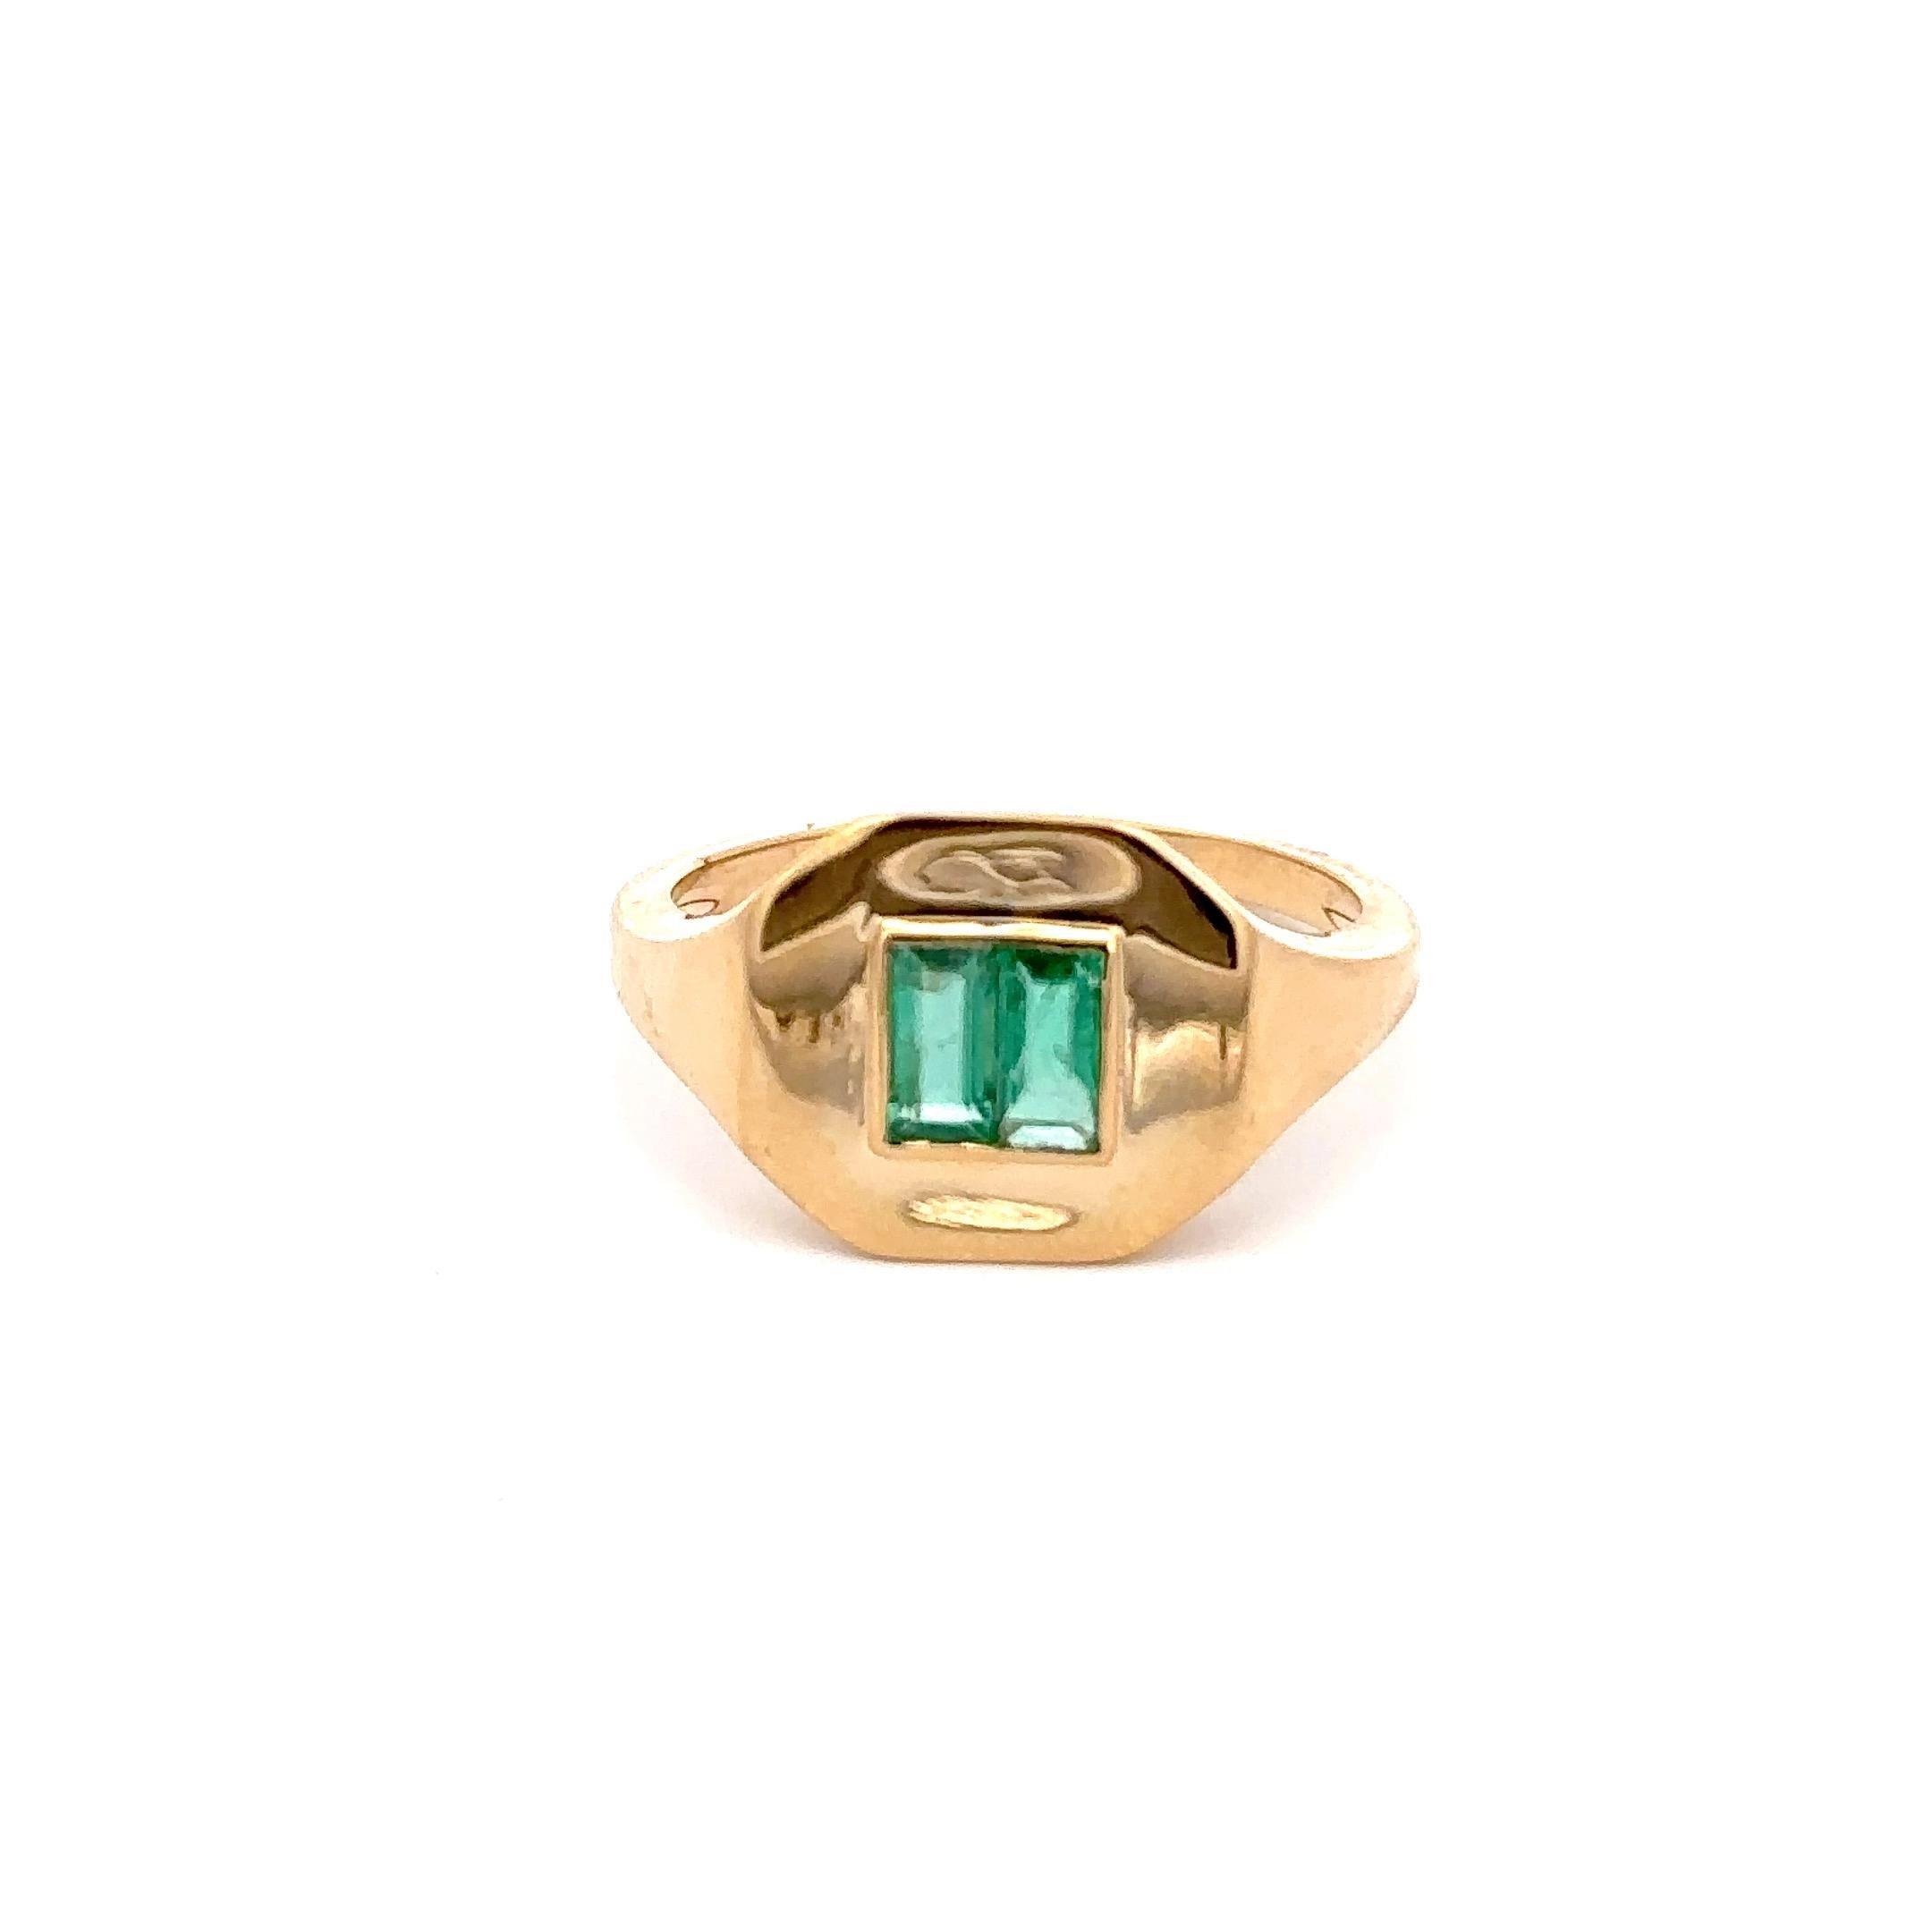 For Sale:  Certified Natural Emerald Signet Ring 14kt Solid Yellow Gold Pinky Ring 7